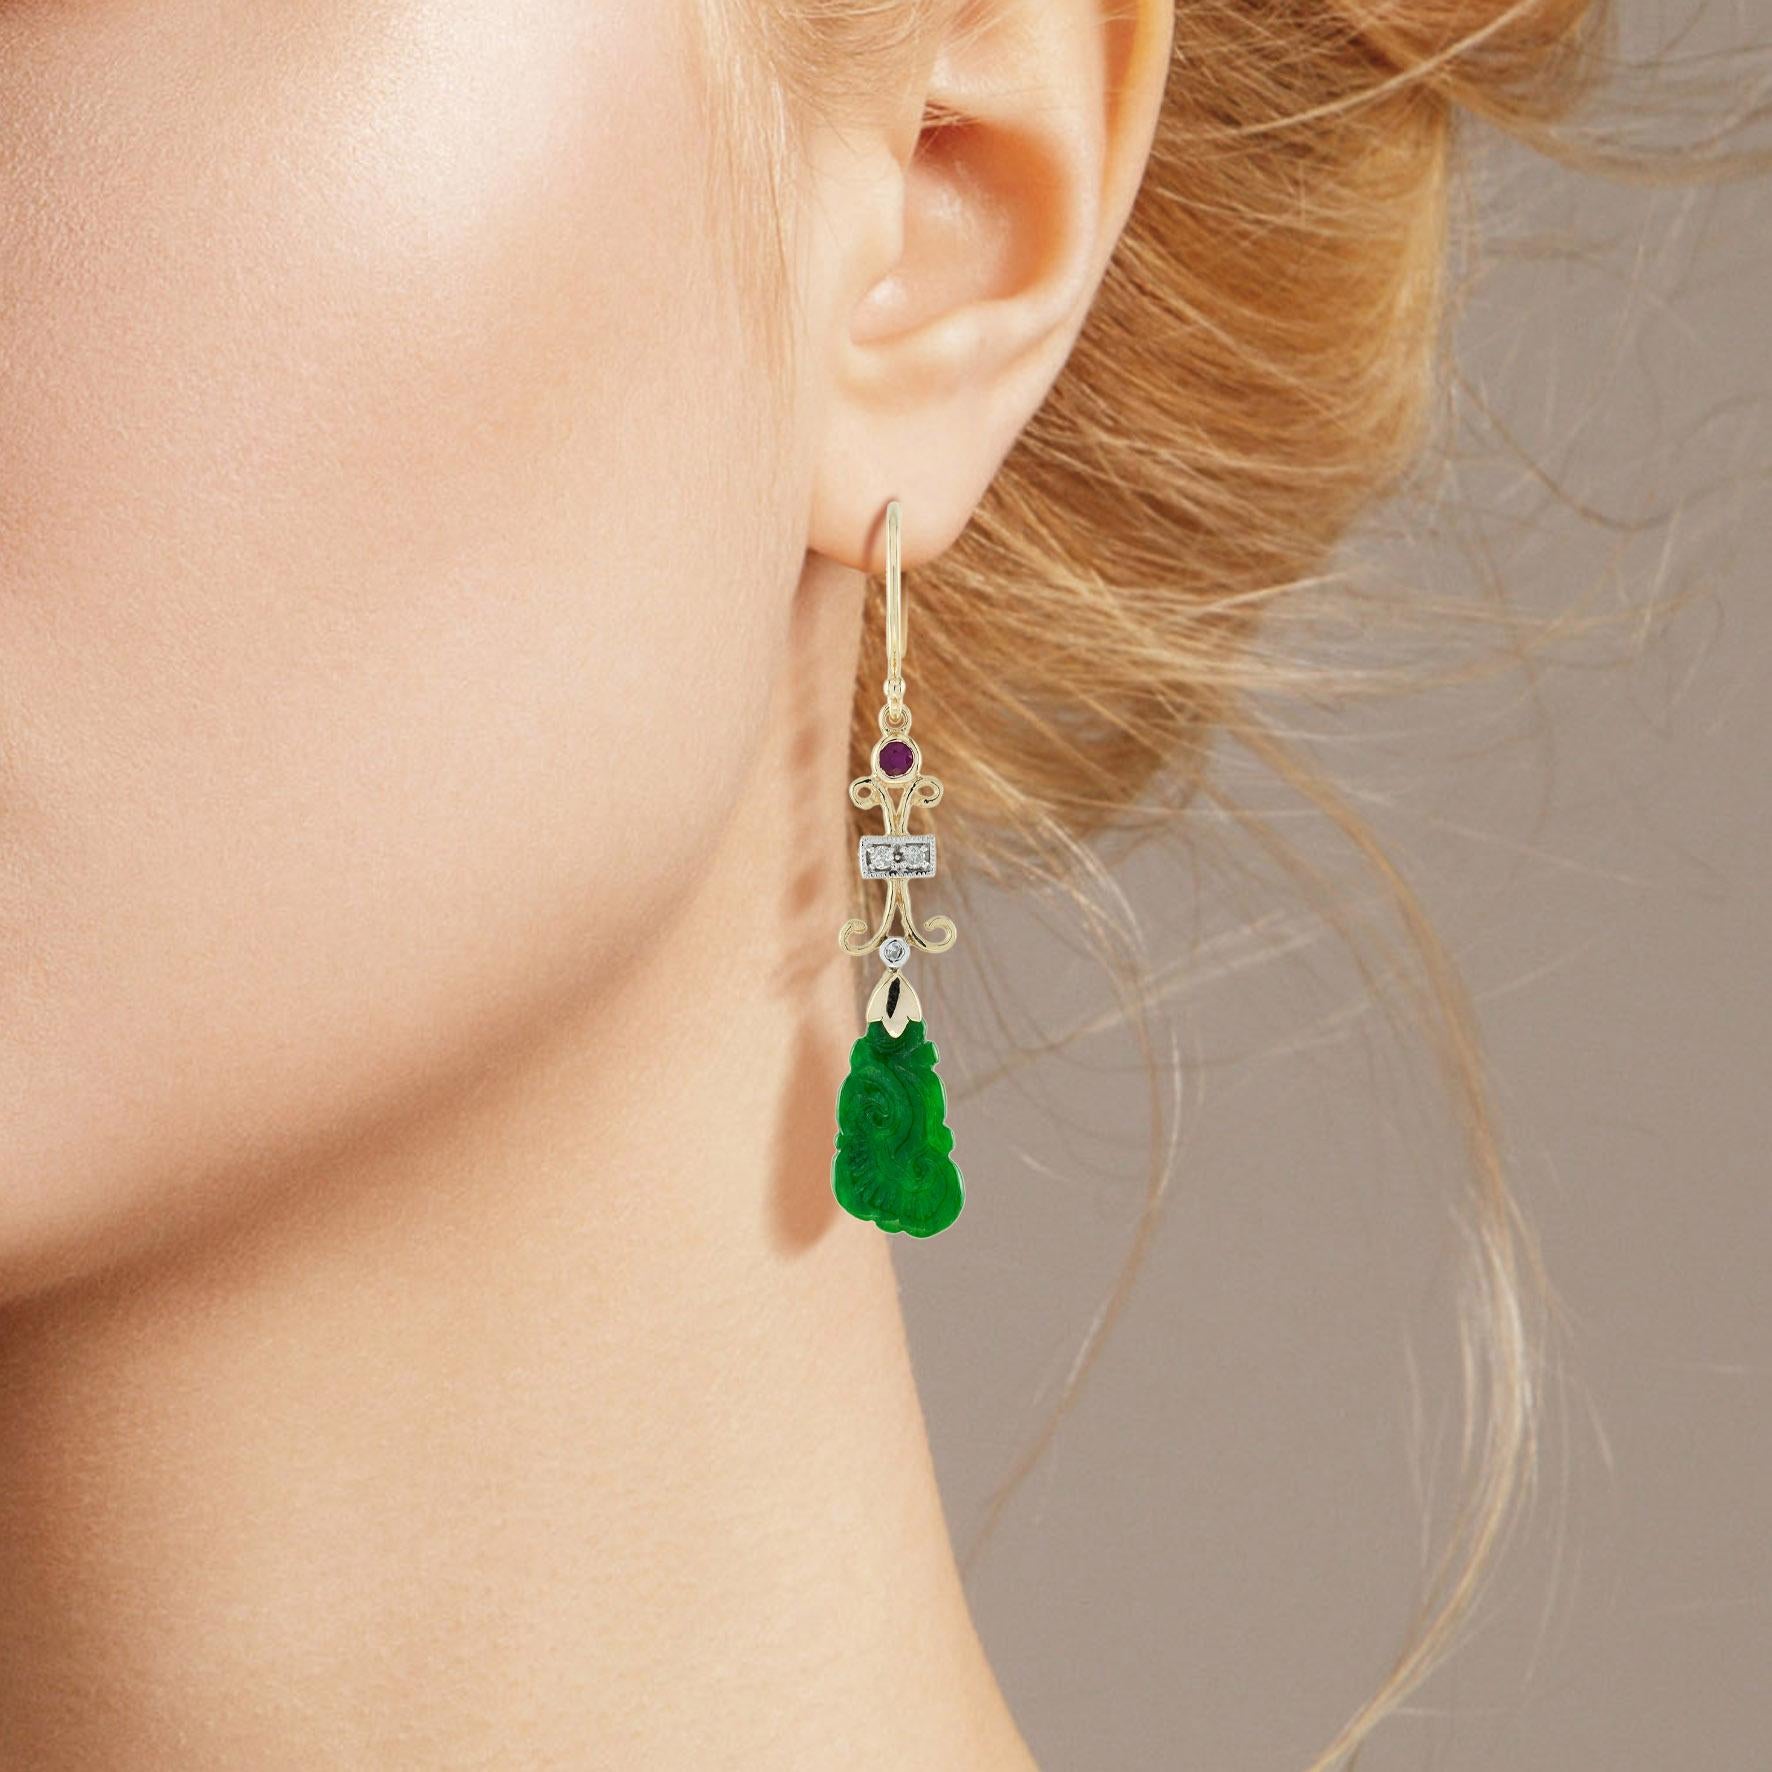 The natural jade in these lovely earrings has some very special shape. Both pieces have a strong green color and well carvings. The jade is suspended in a 9k yellow gold setting with ruby and diamond link on the top. The earrings transfer their good